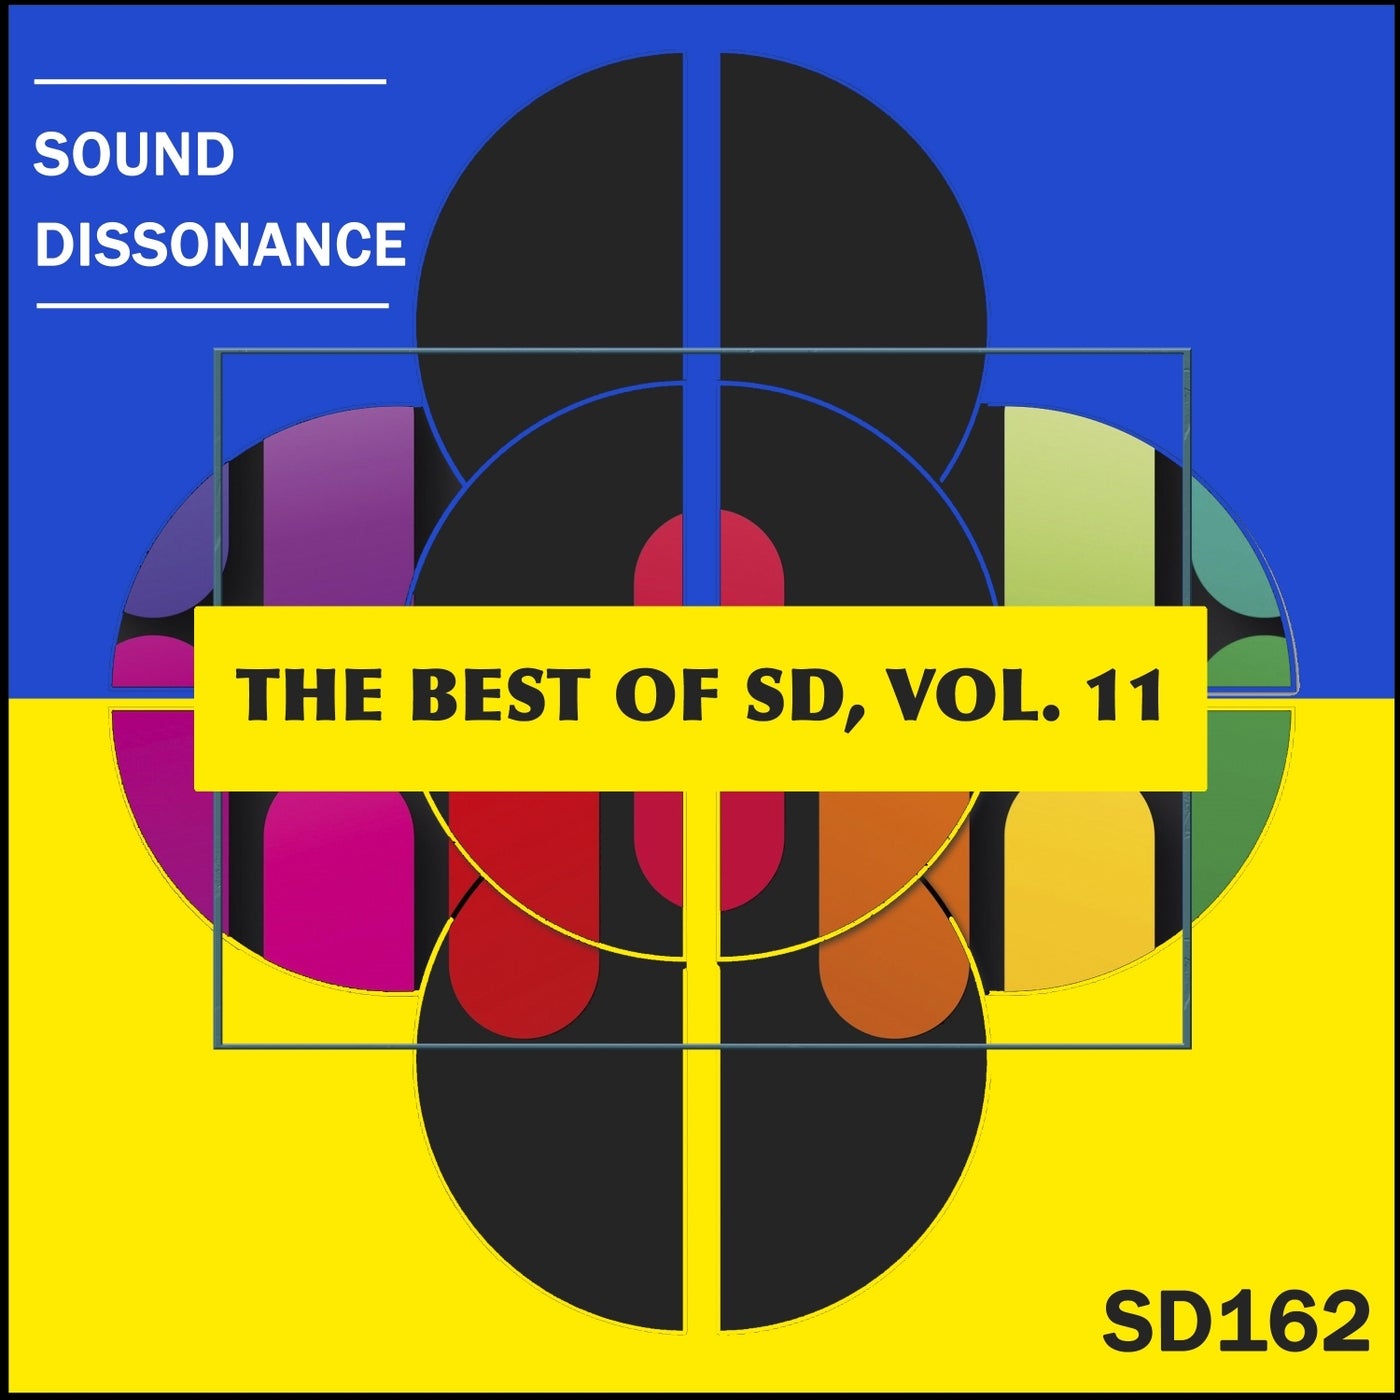 The Best of Sd, Vol. 11